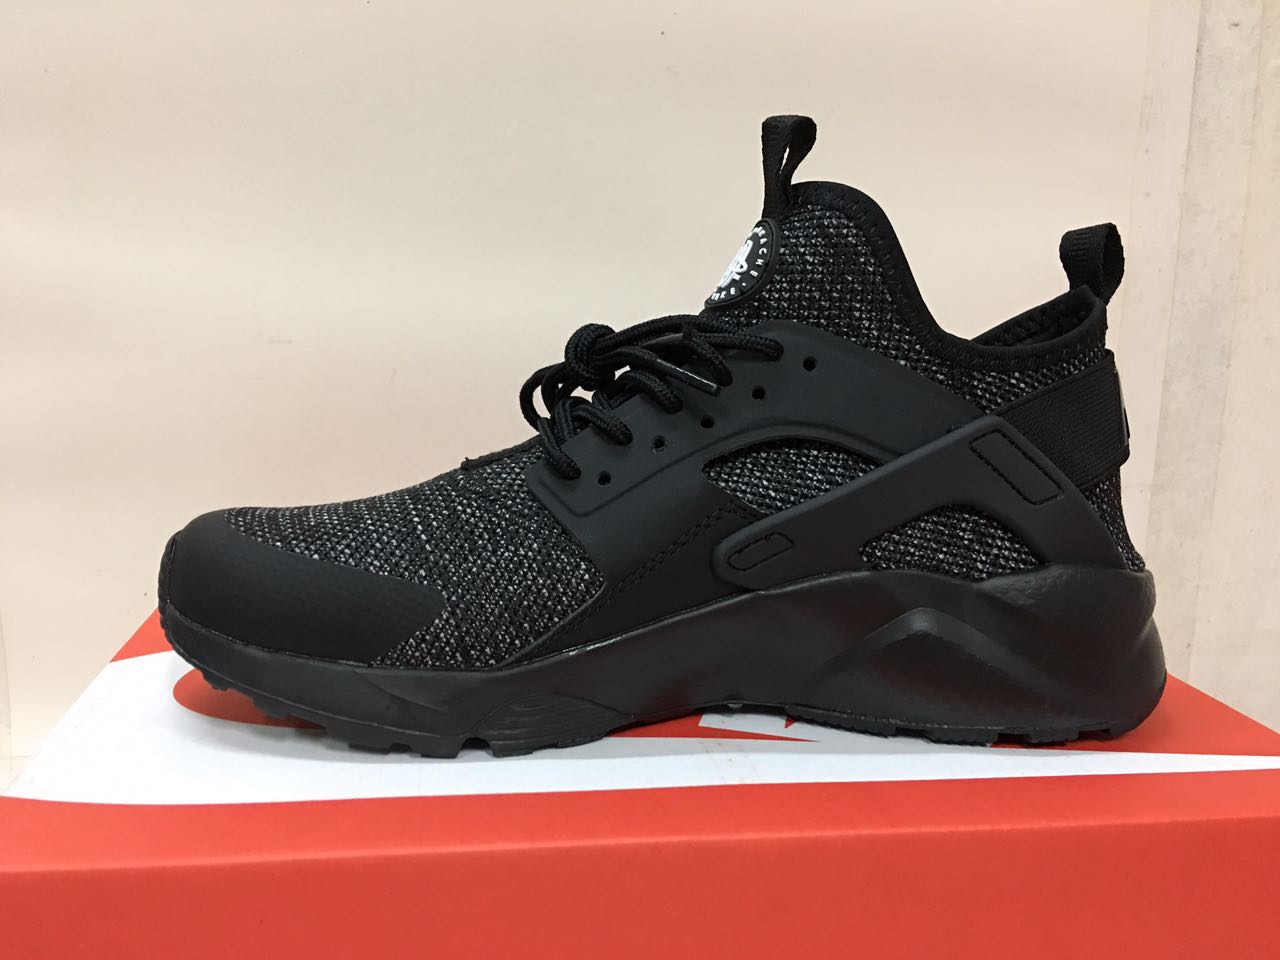 Nike Air Huarache 6 Flyknit Carbon Black Shoes - Click Image to Close